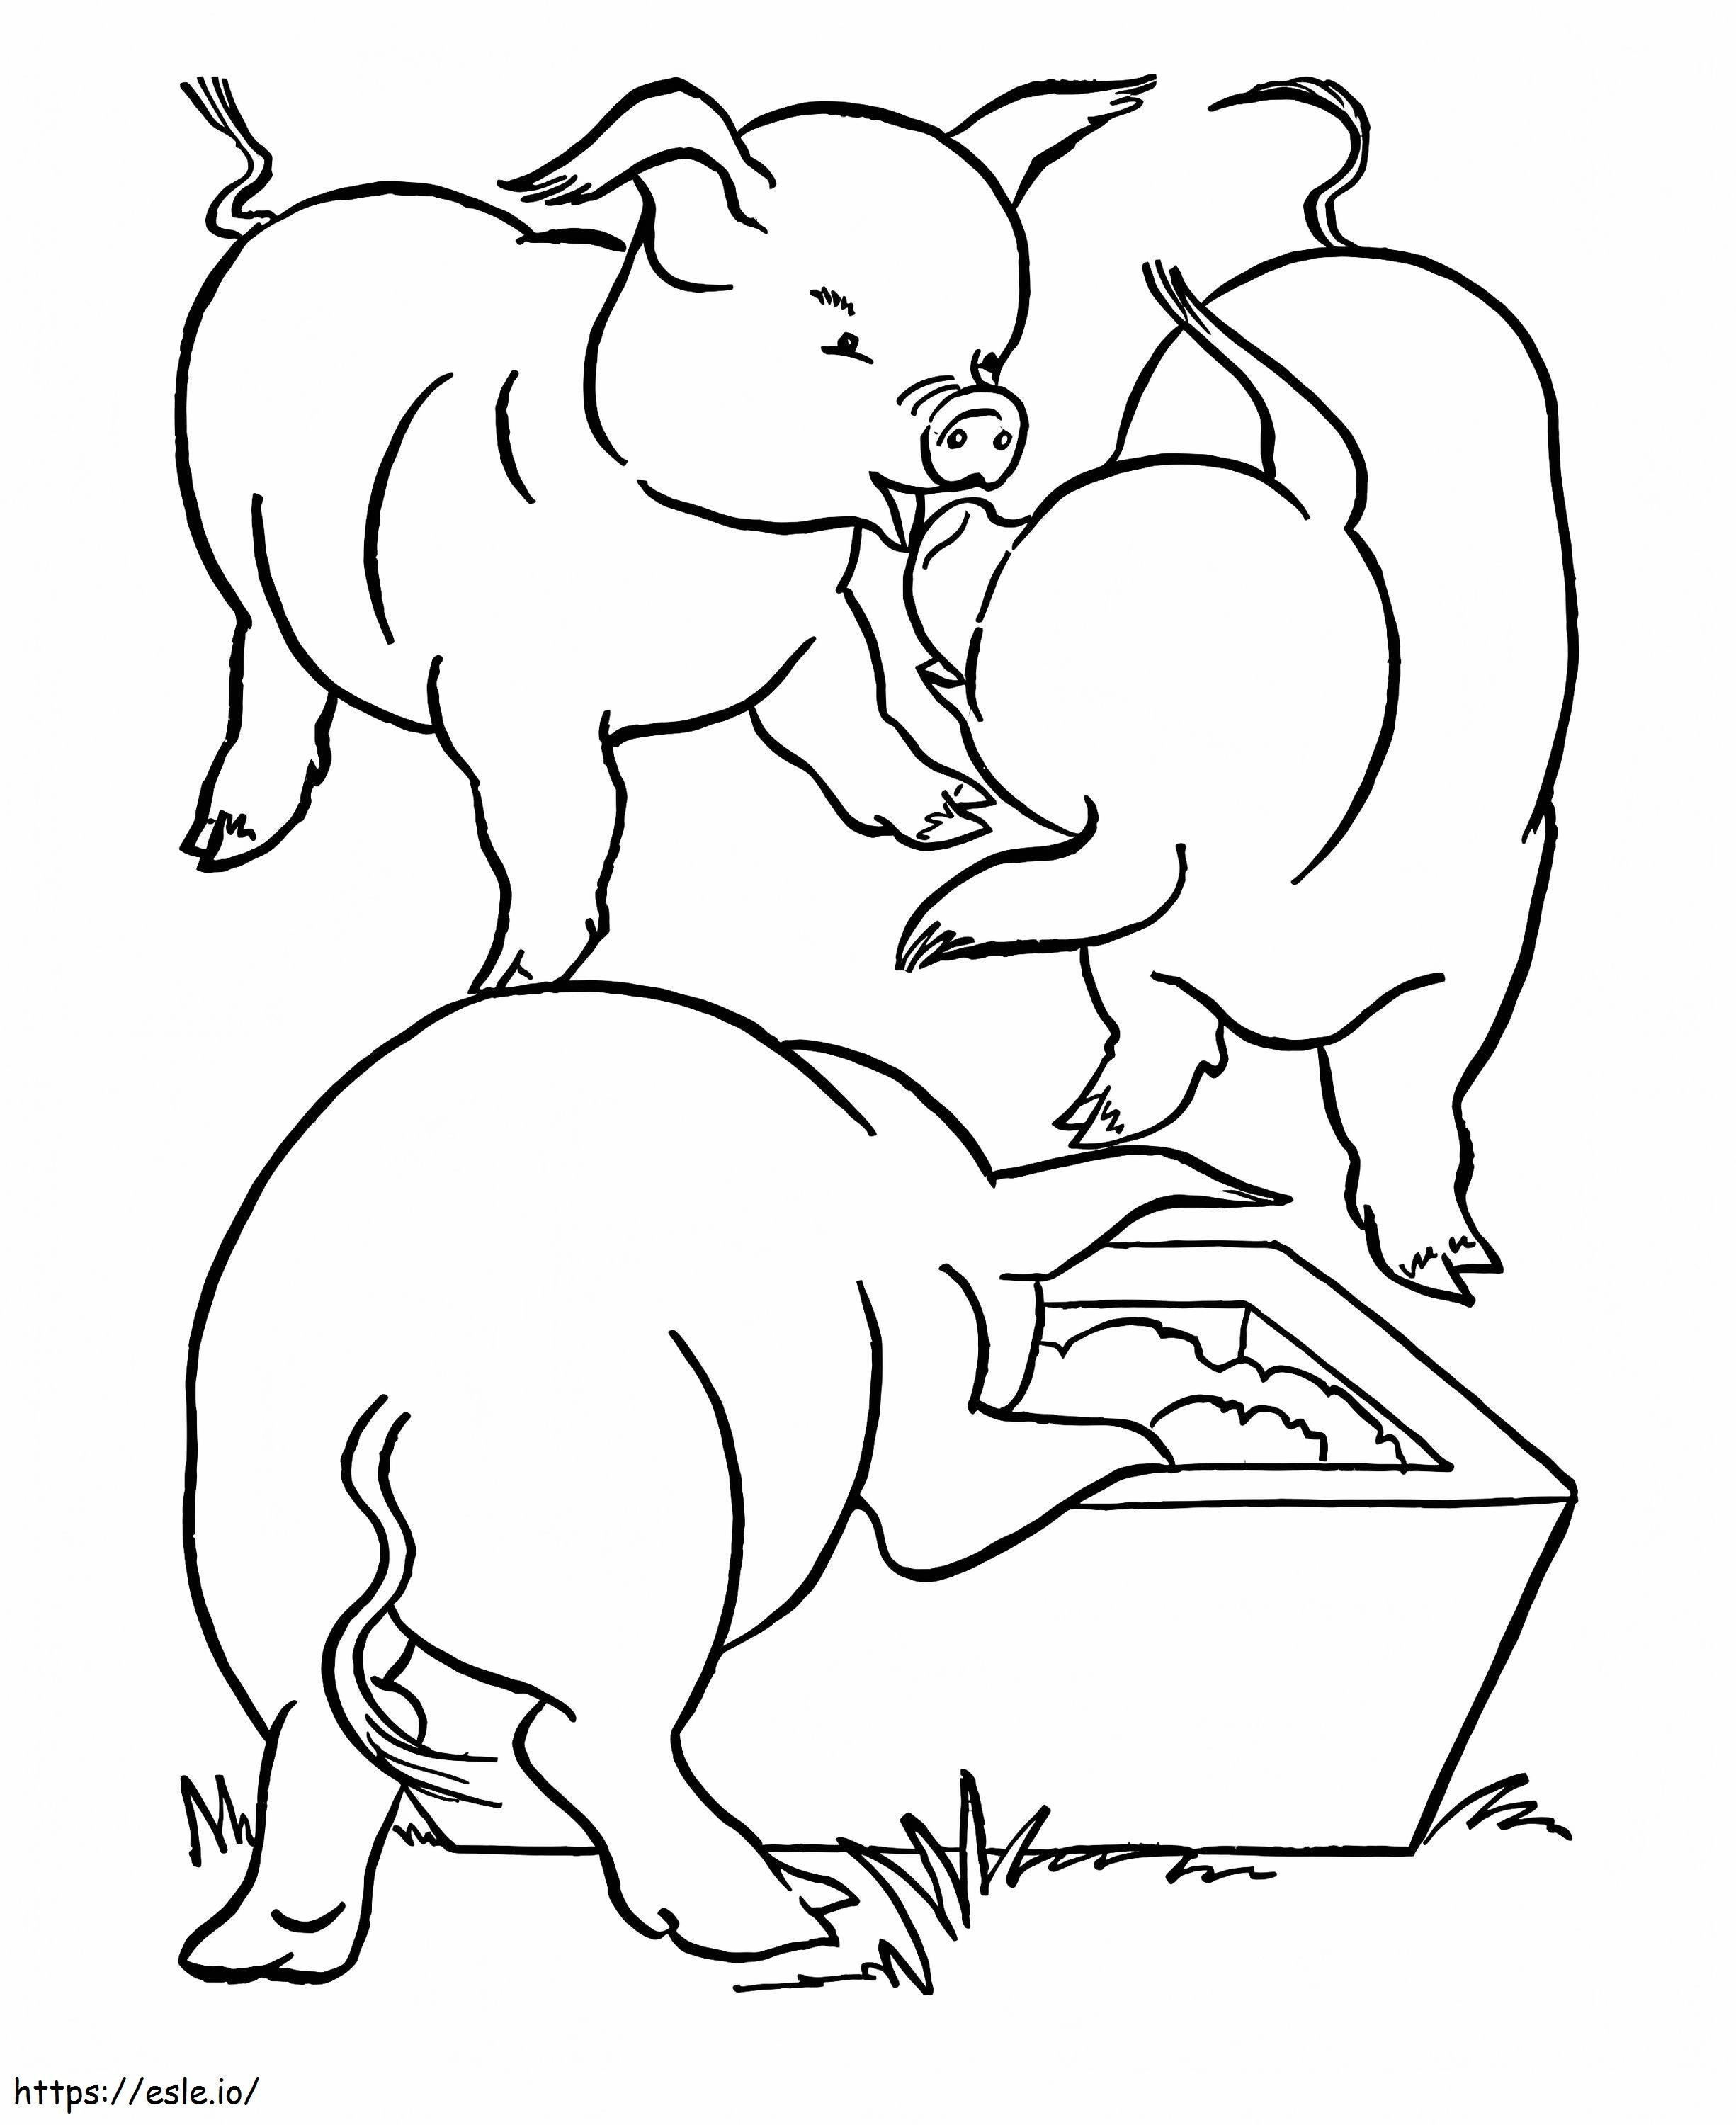 Three Pigs coloring page